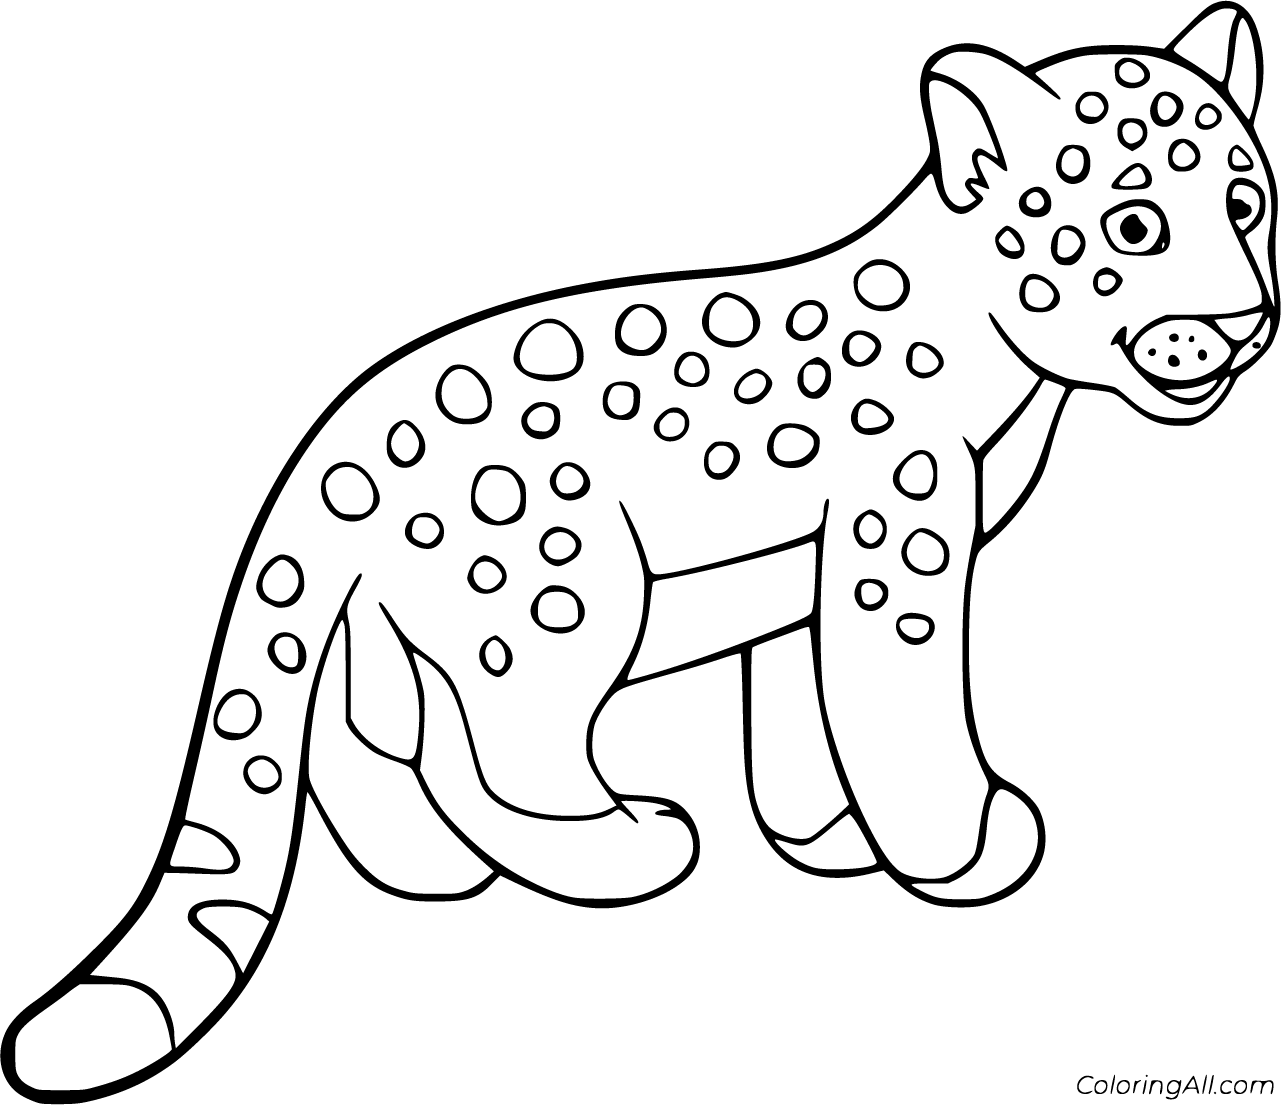 Leopard Coloring Pages - ColoringAll